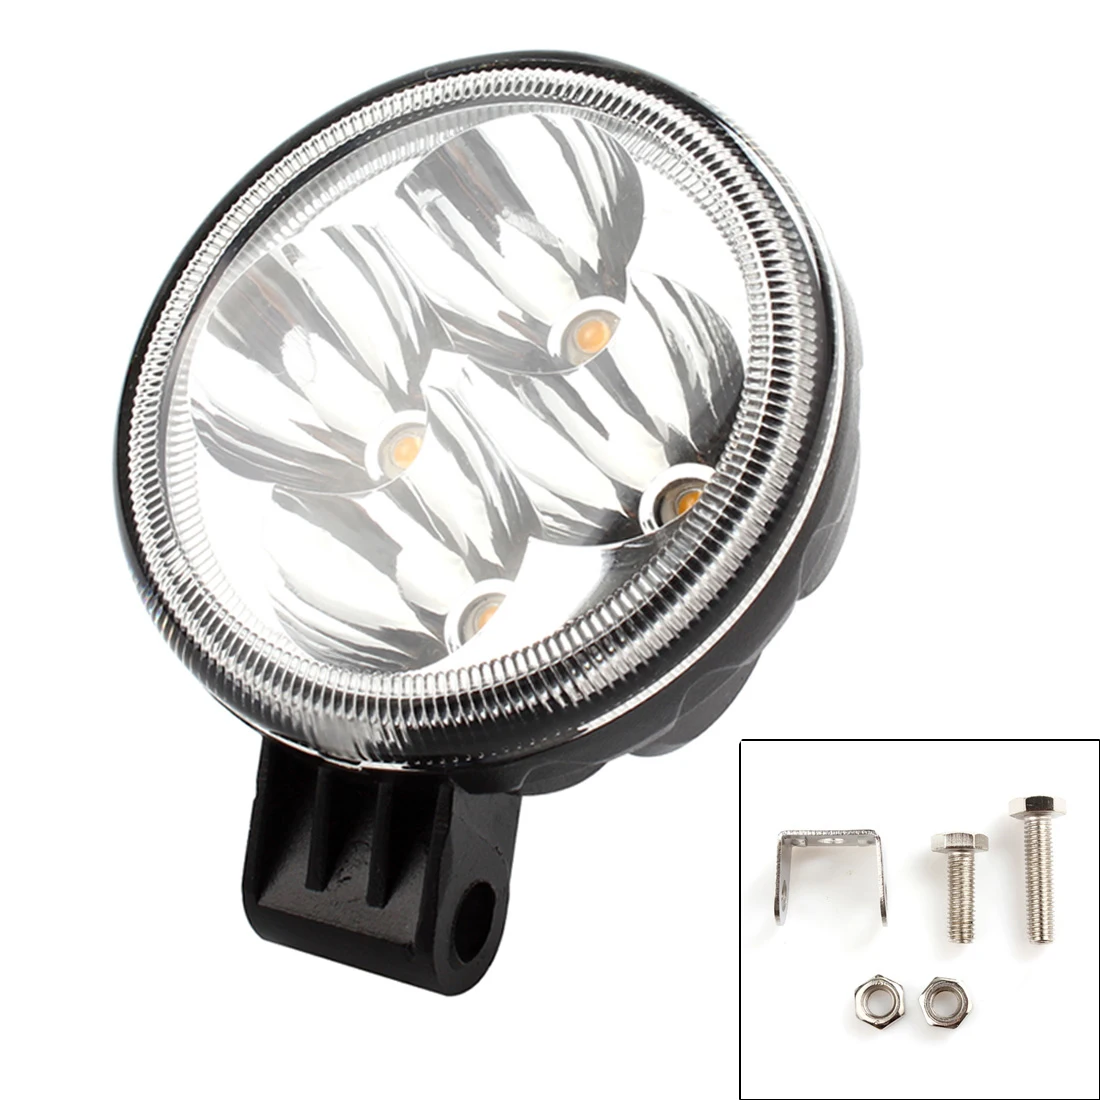 

12W Work Light Car LED Working Light Bar Spot Flood Combo Driving Lamp 2000K 780LM for Truck SUV 4X4 4WD ATV Offroad Cars